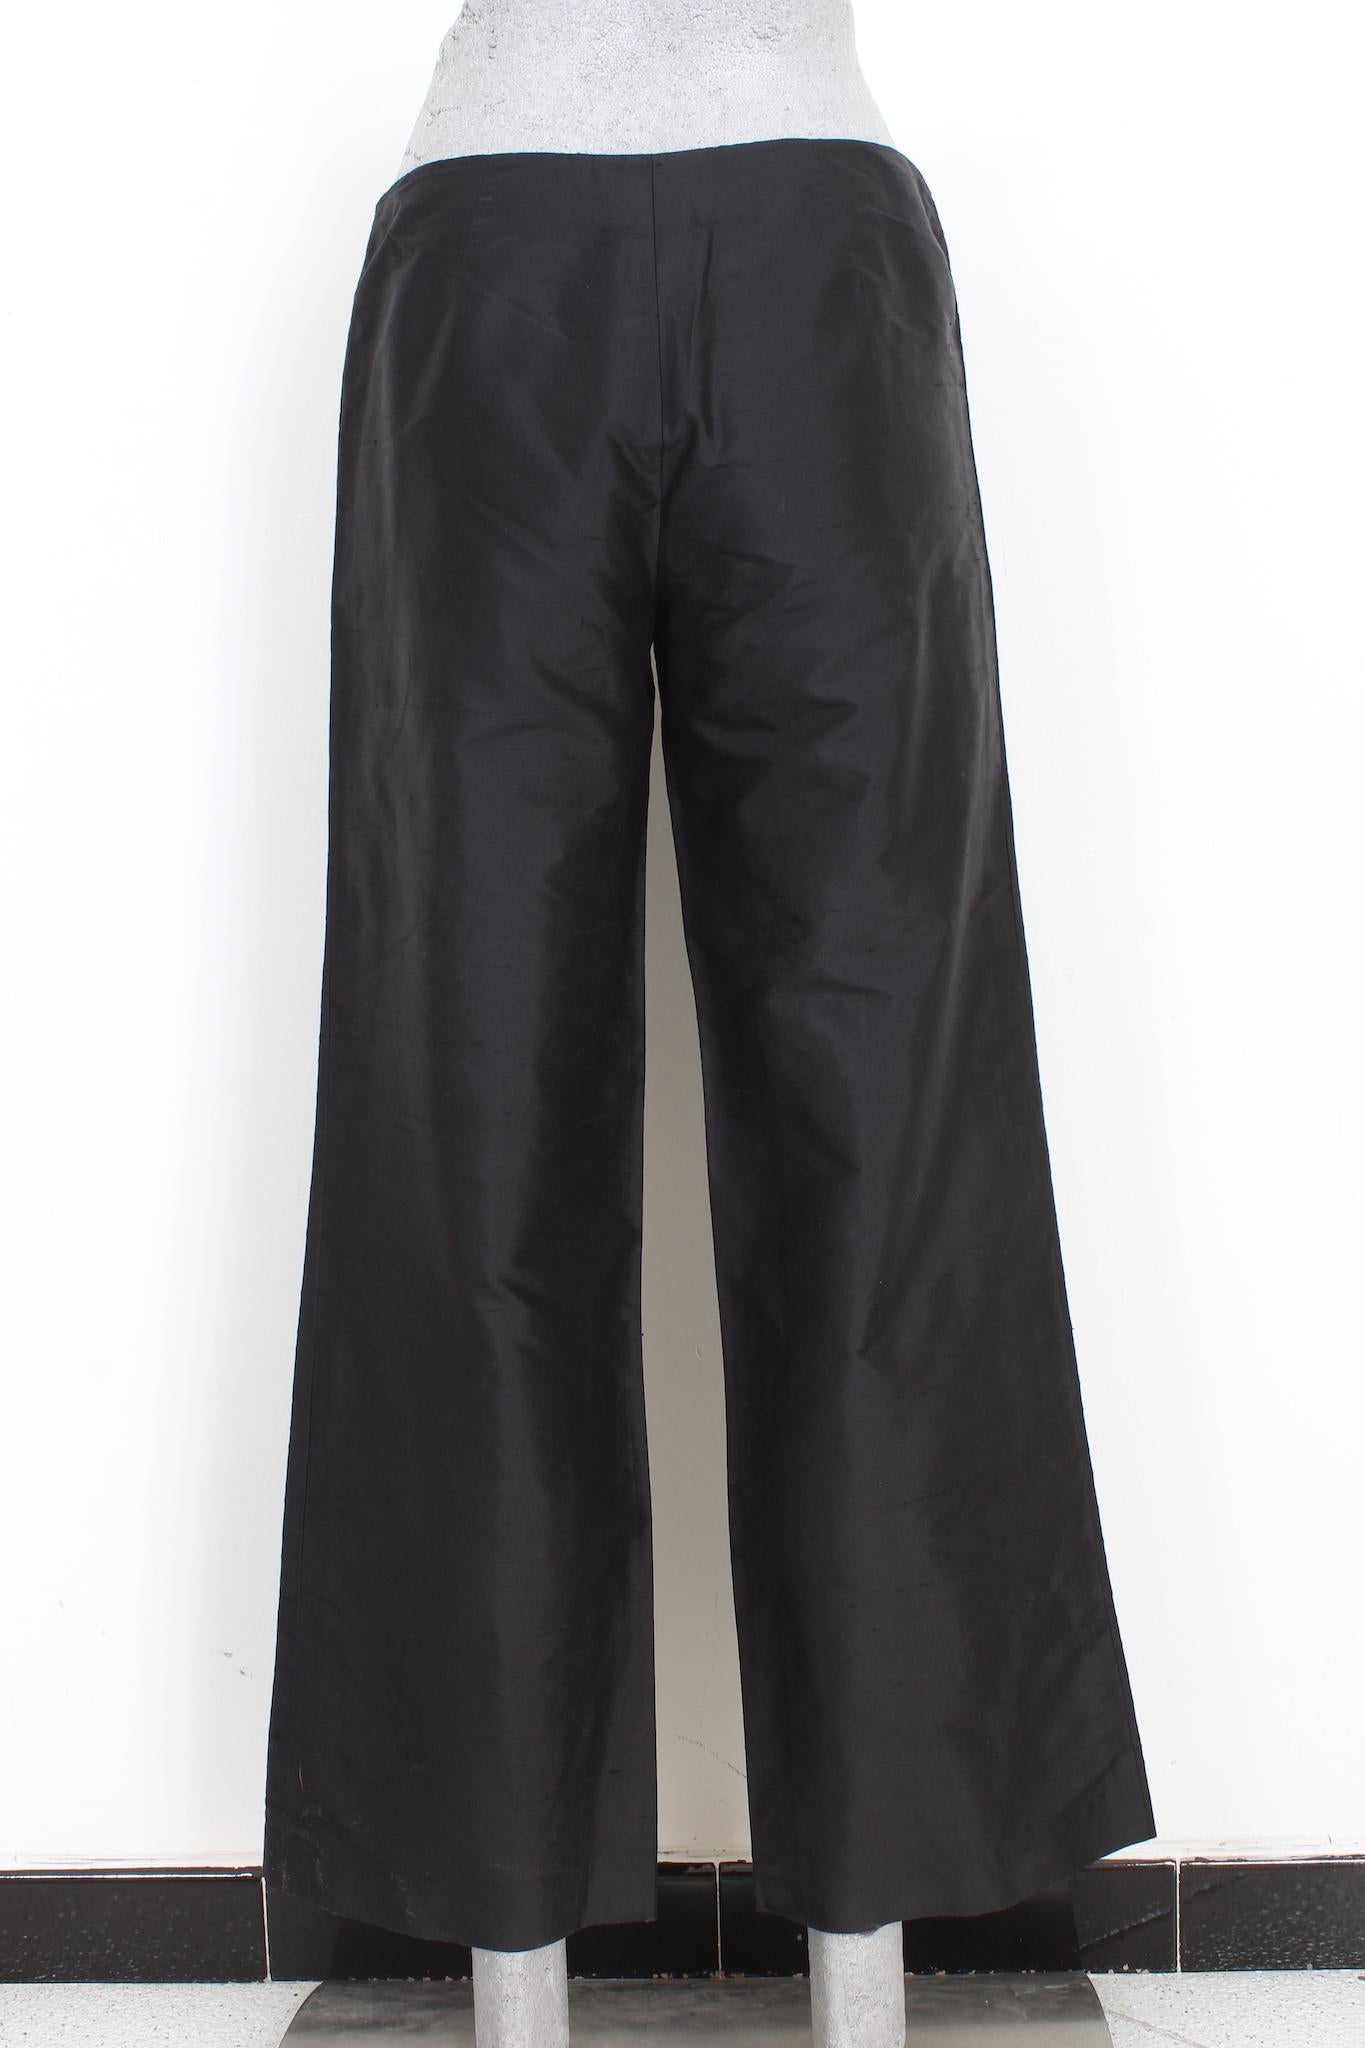 Luisa Spagnoli elegant black trousers from the 2000s. Wide leg model, no pockets, closure with zip and gold-colored clip. 100% silk fabric. Made in Italy.

Size: 42 It 8 Us 10 Uk 38 Fr

Waist: 38 cm
Length: 97 cm
Hem: 26 cm
Pants crotch: 75 cm
